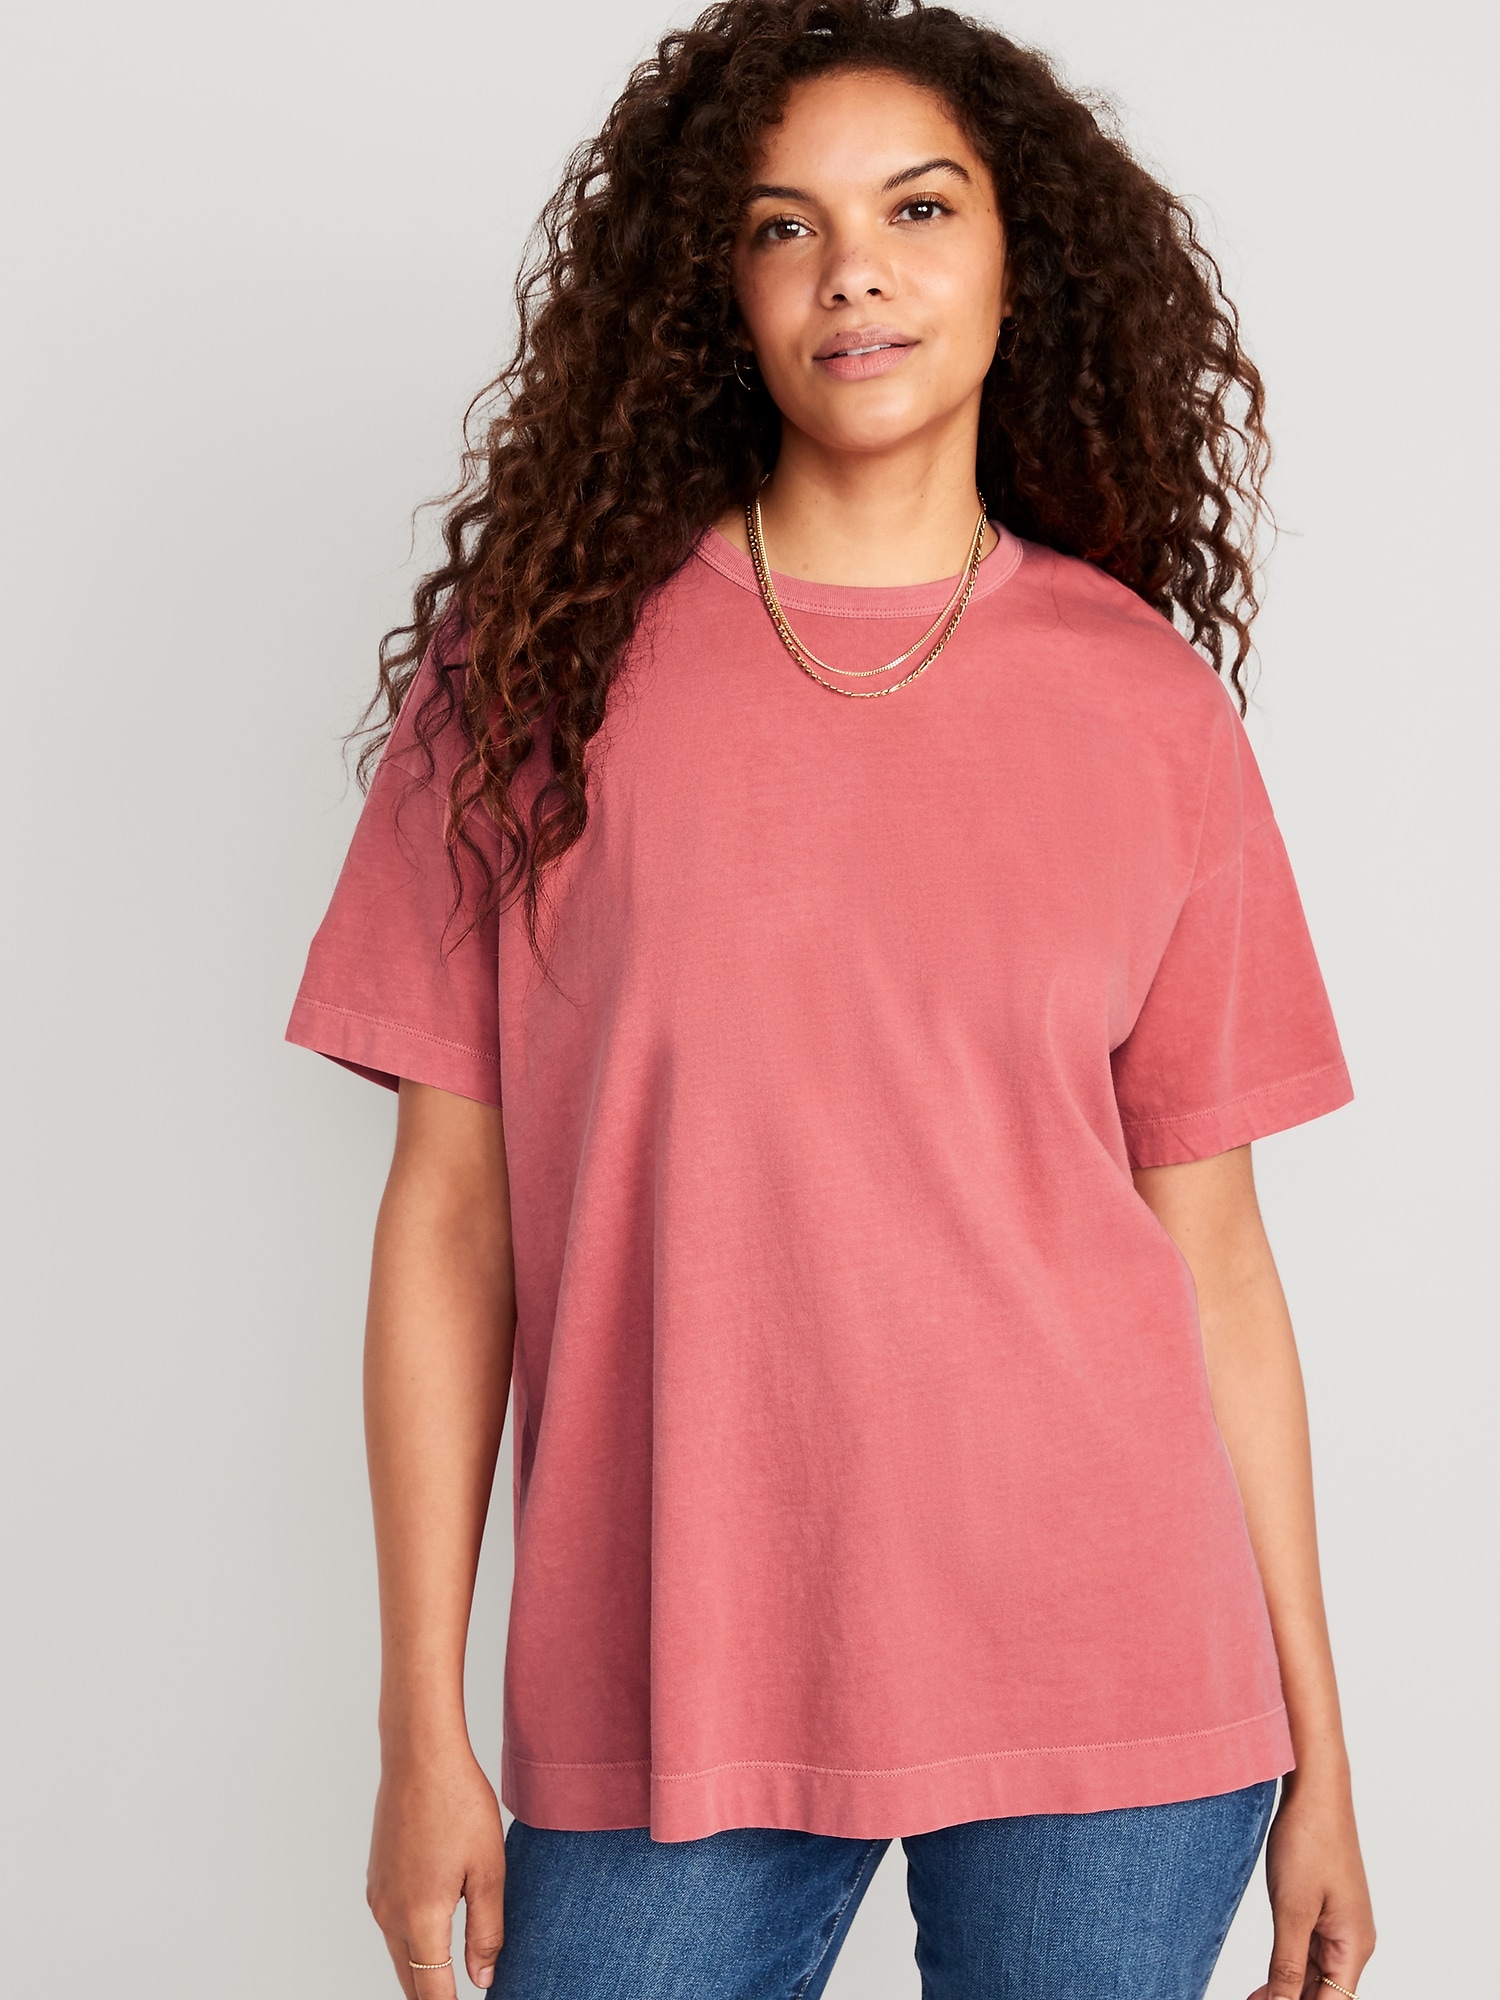 Old Navy Oversized Vintage Tunic T-Shirt for Women pink. 1